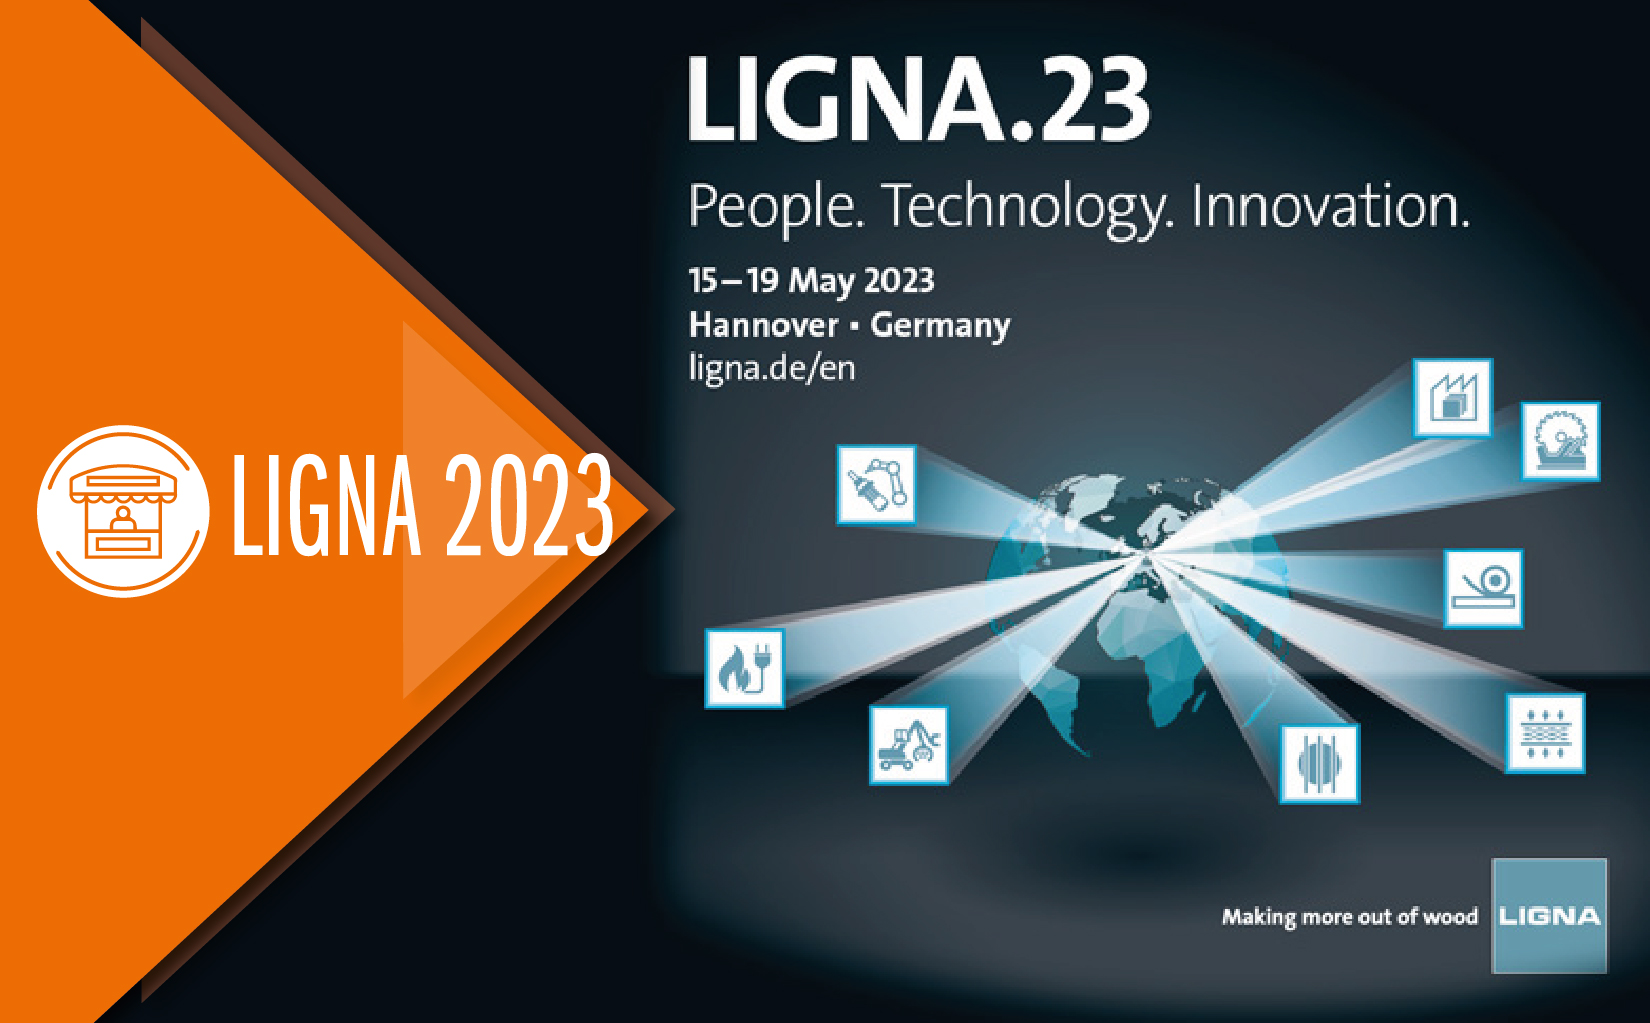 CMT brings the orange tools to LIGNA - May 15-19th 2023